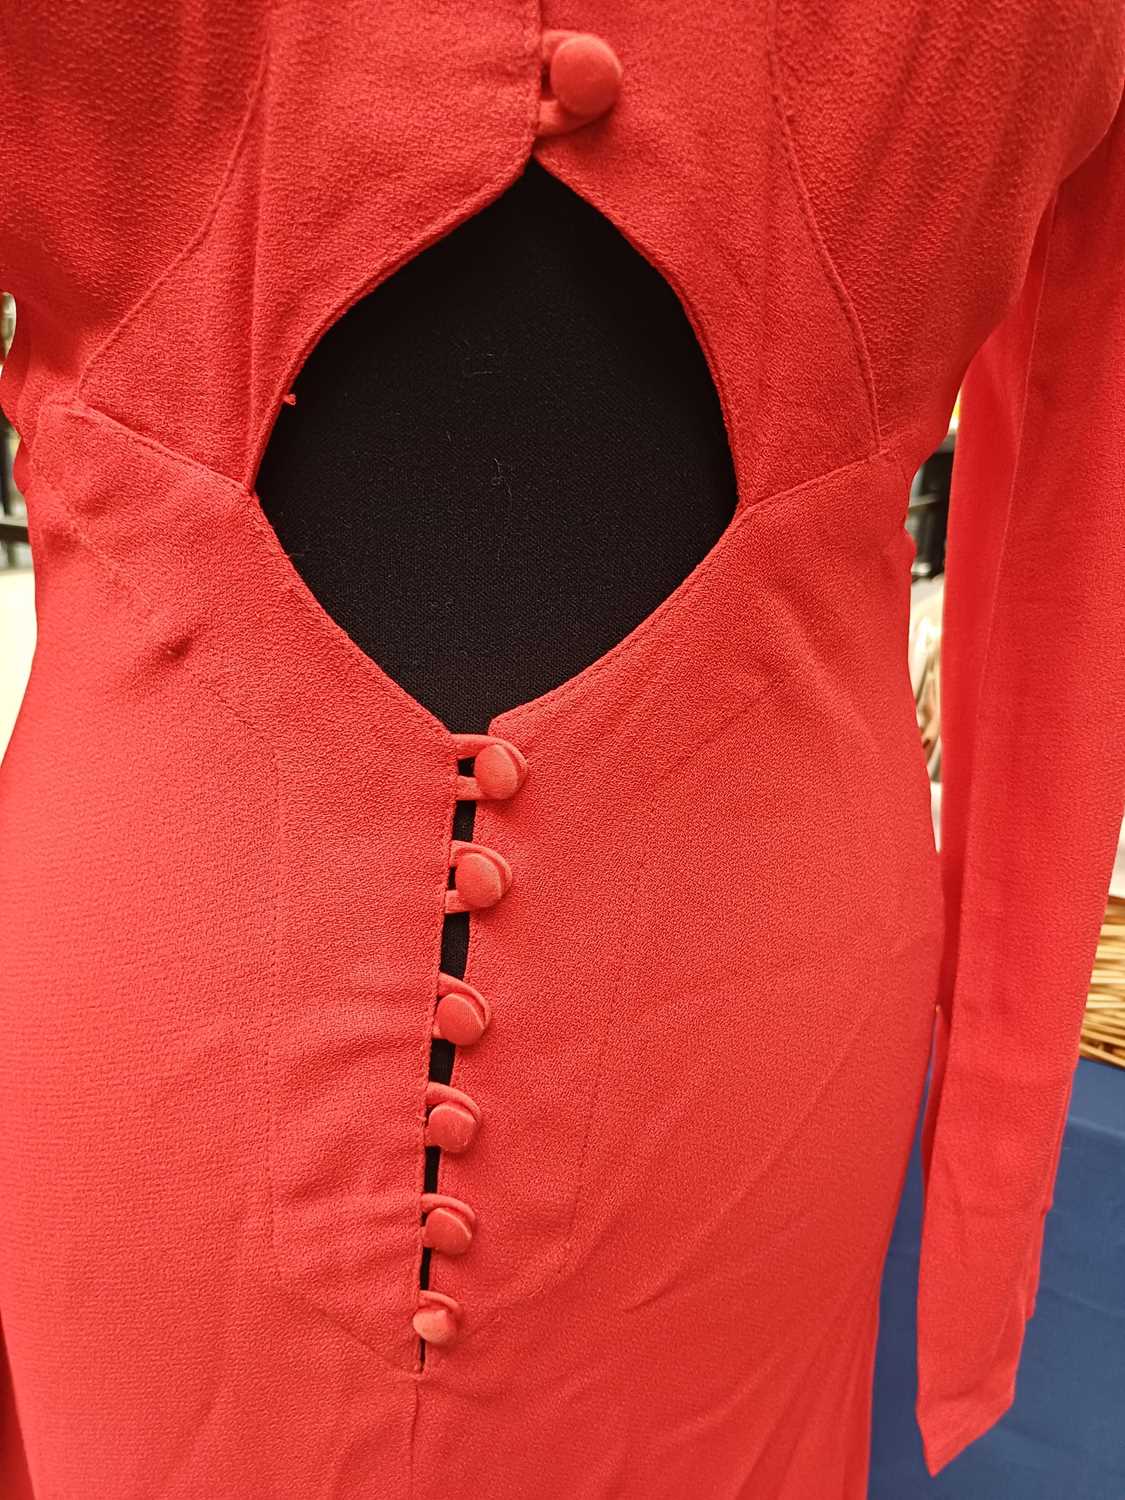 Ossie Clark Red Moss Crepe Long Dress with long sleeves, covered buttons with loop fastenings to the - Image 15 of 20